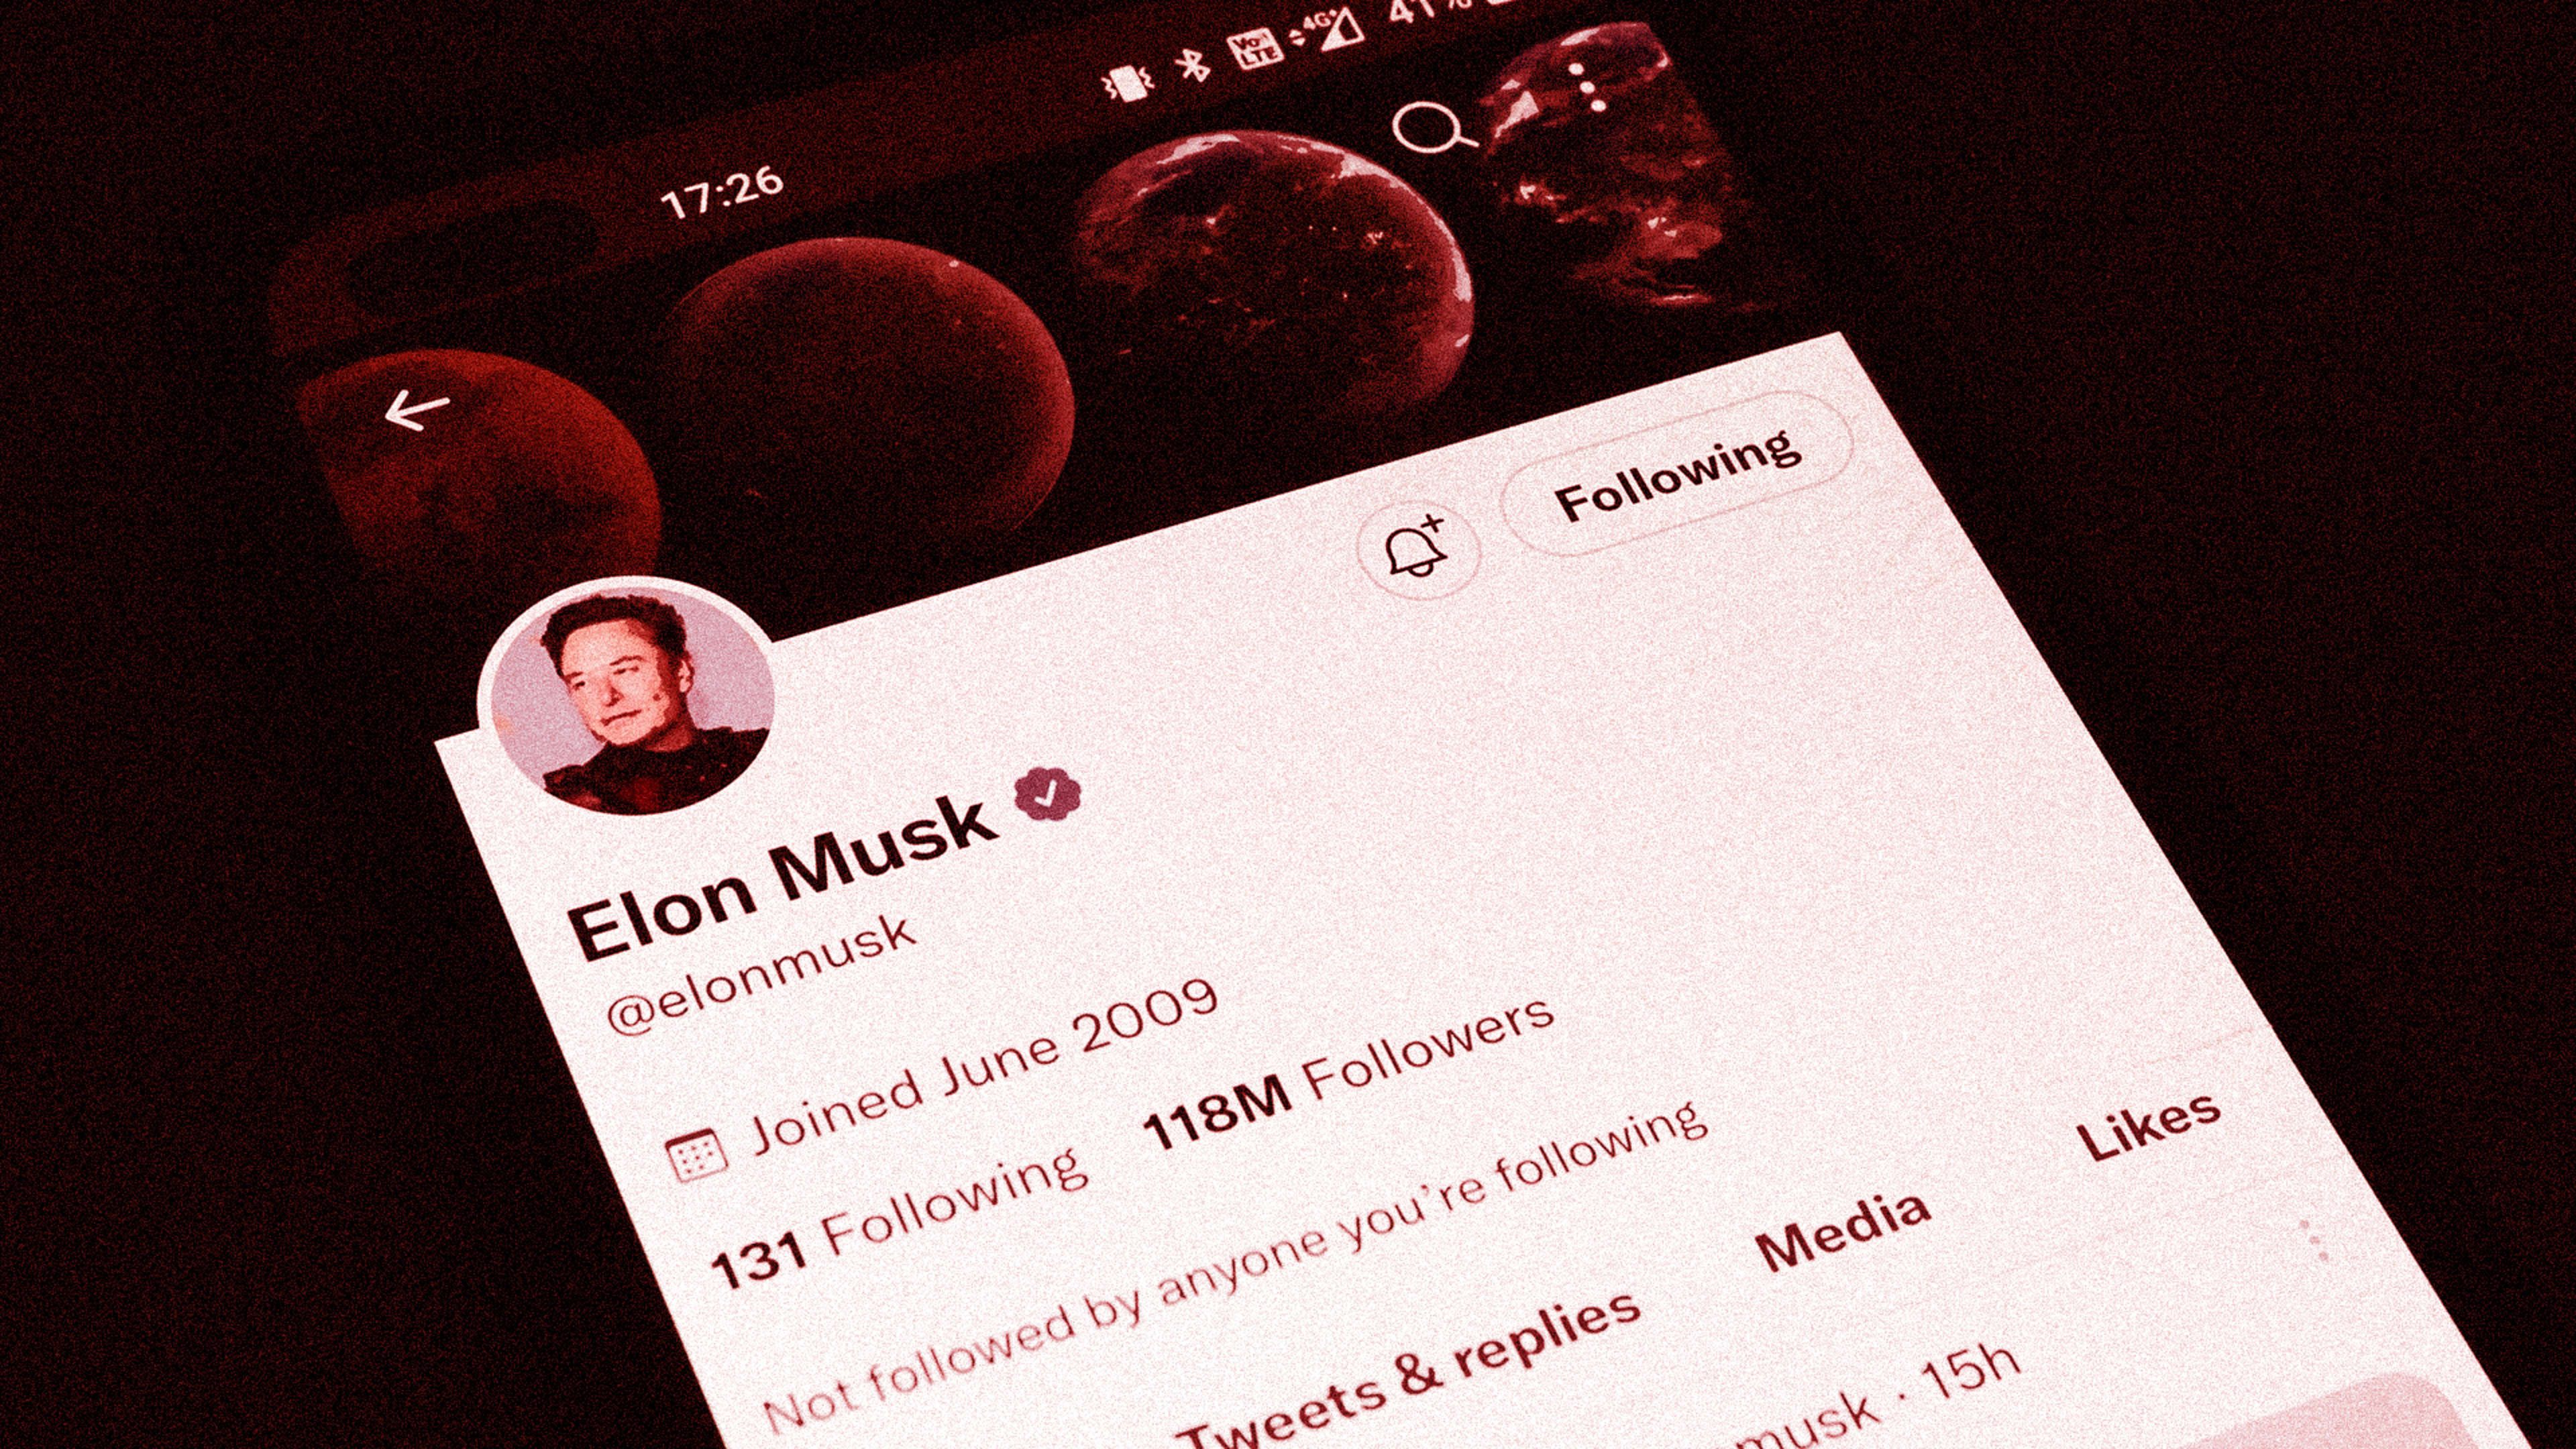 It’s been one year since Elon Musk first offered to buy Twitter. Ex-employees say he’s ‘constitutionally incapable’ of turning things around